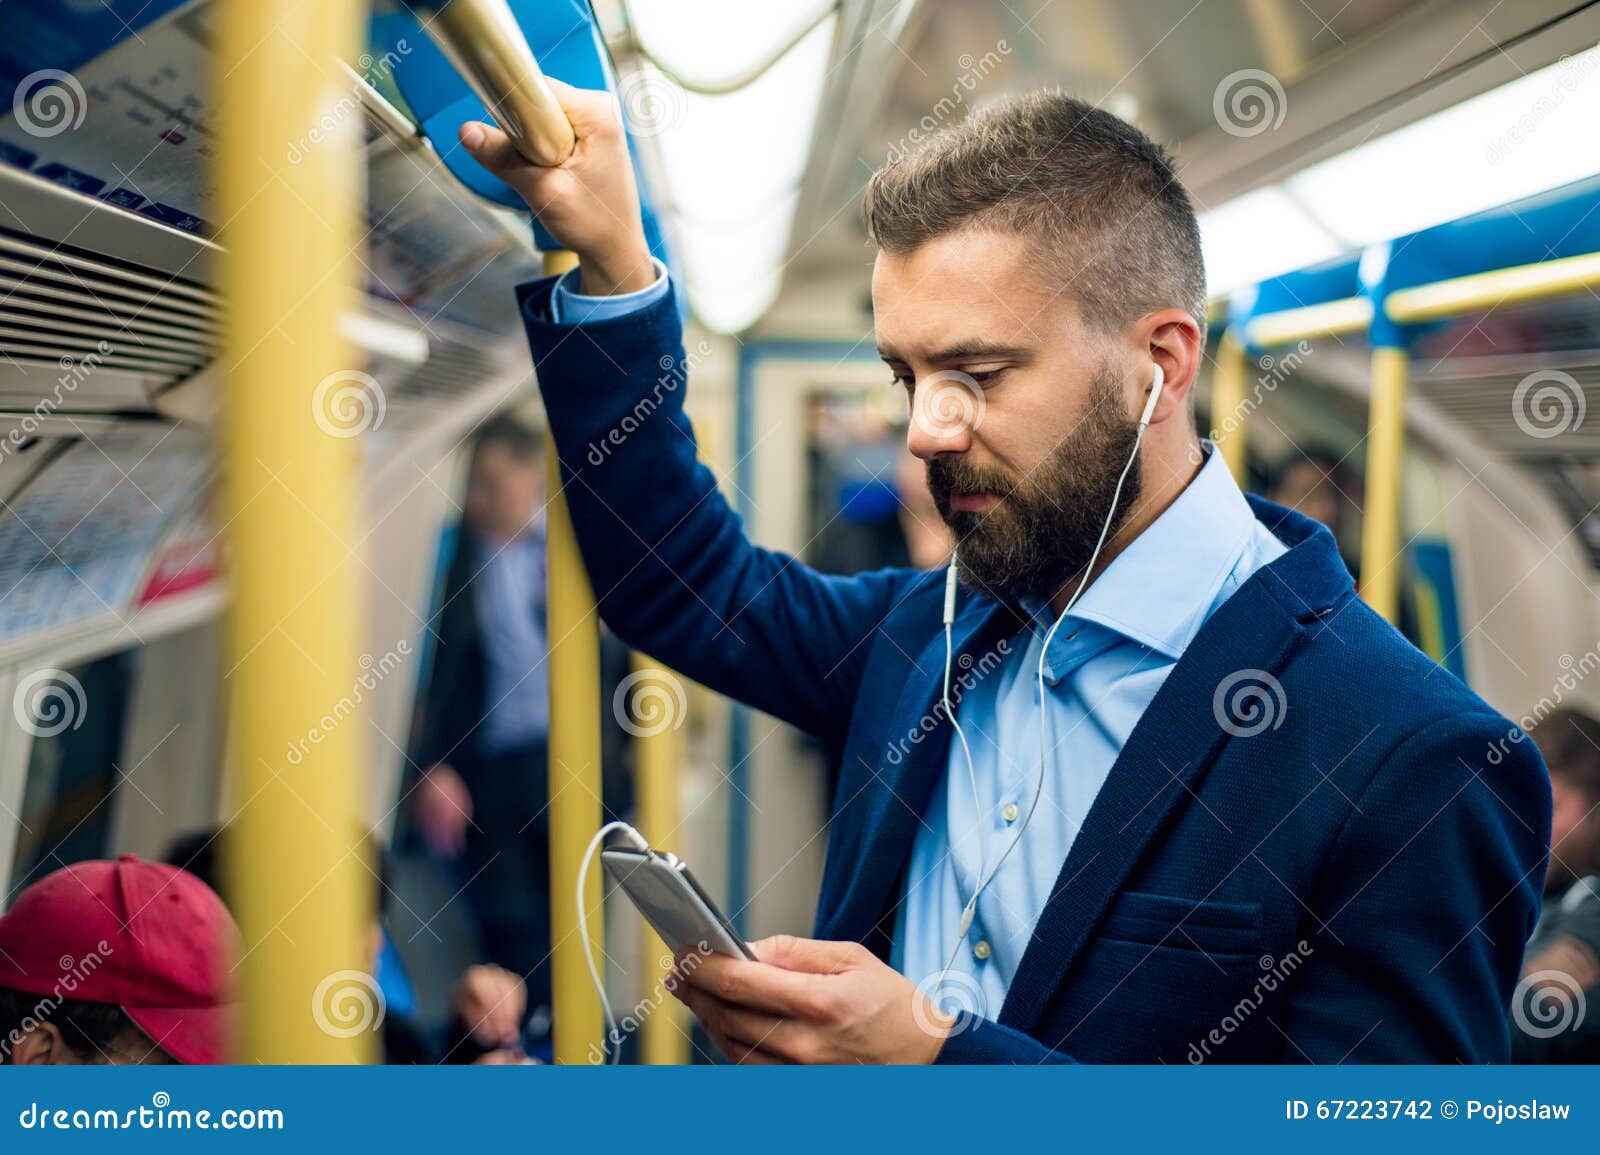 serious businessman travelling to work. standing inside underground wagon.